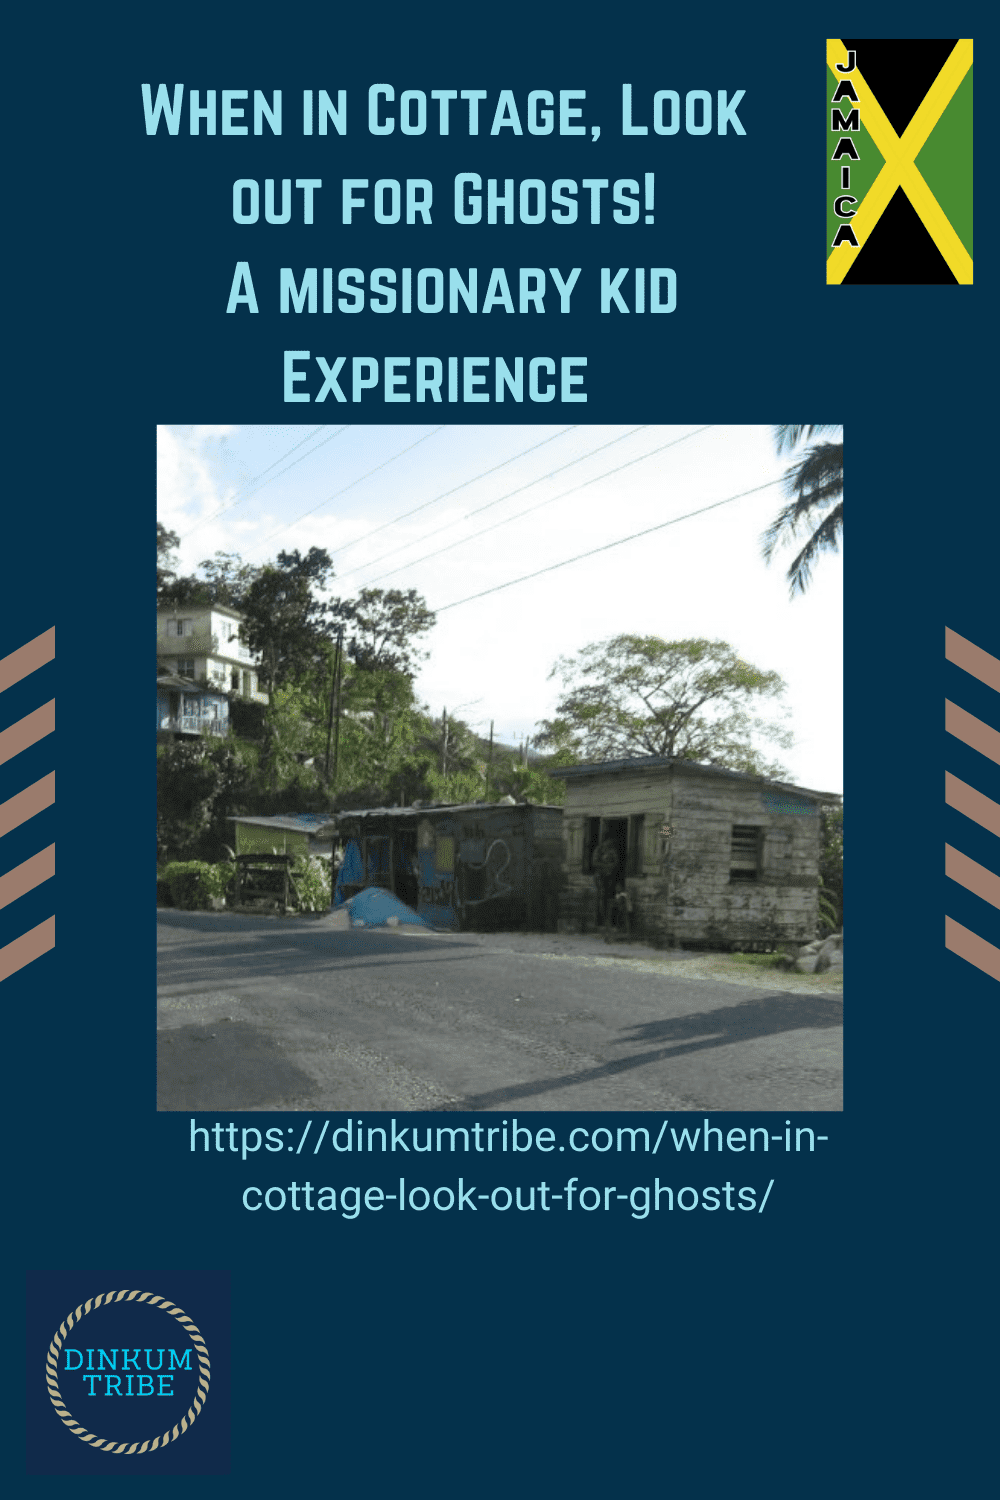 country road and houses in Jamaica. Dinkum Tribe Logo and URL. Text says when in cottage look our for ghosts! a missionary kid experience